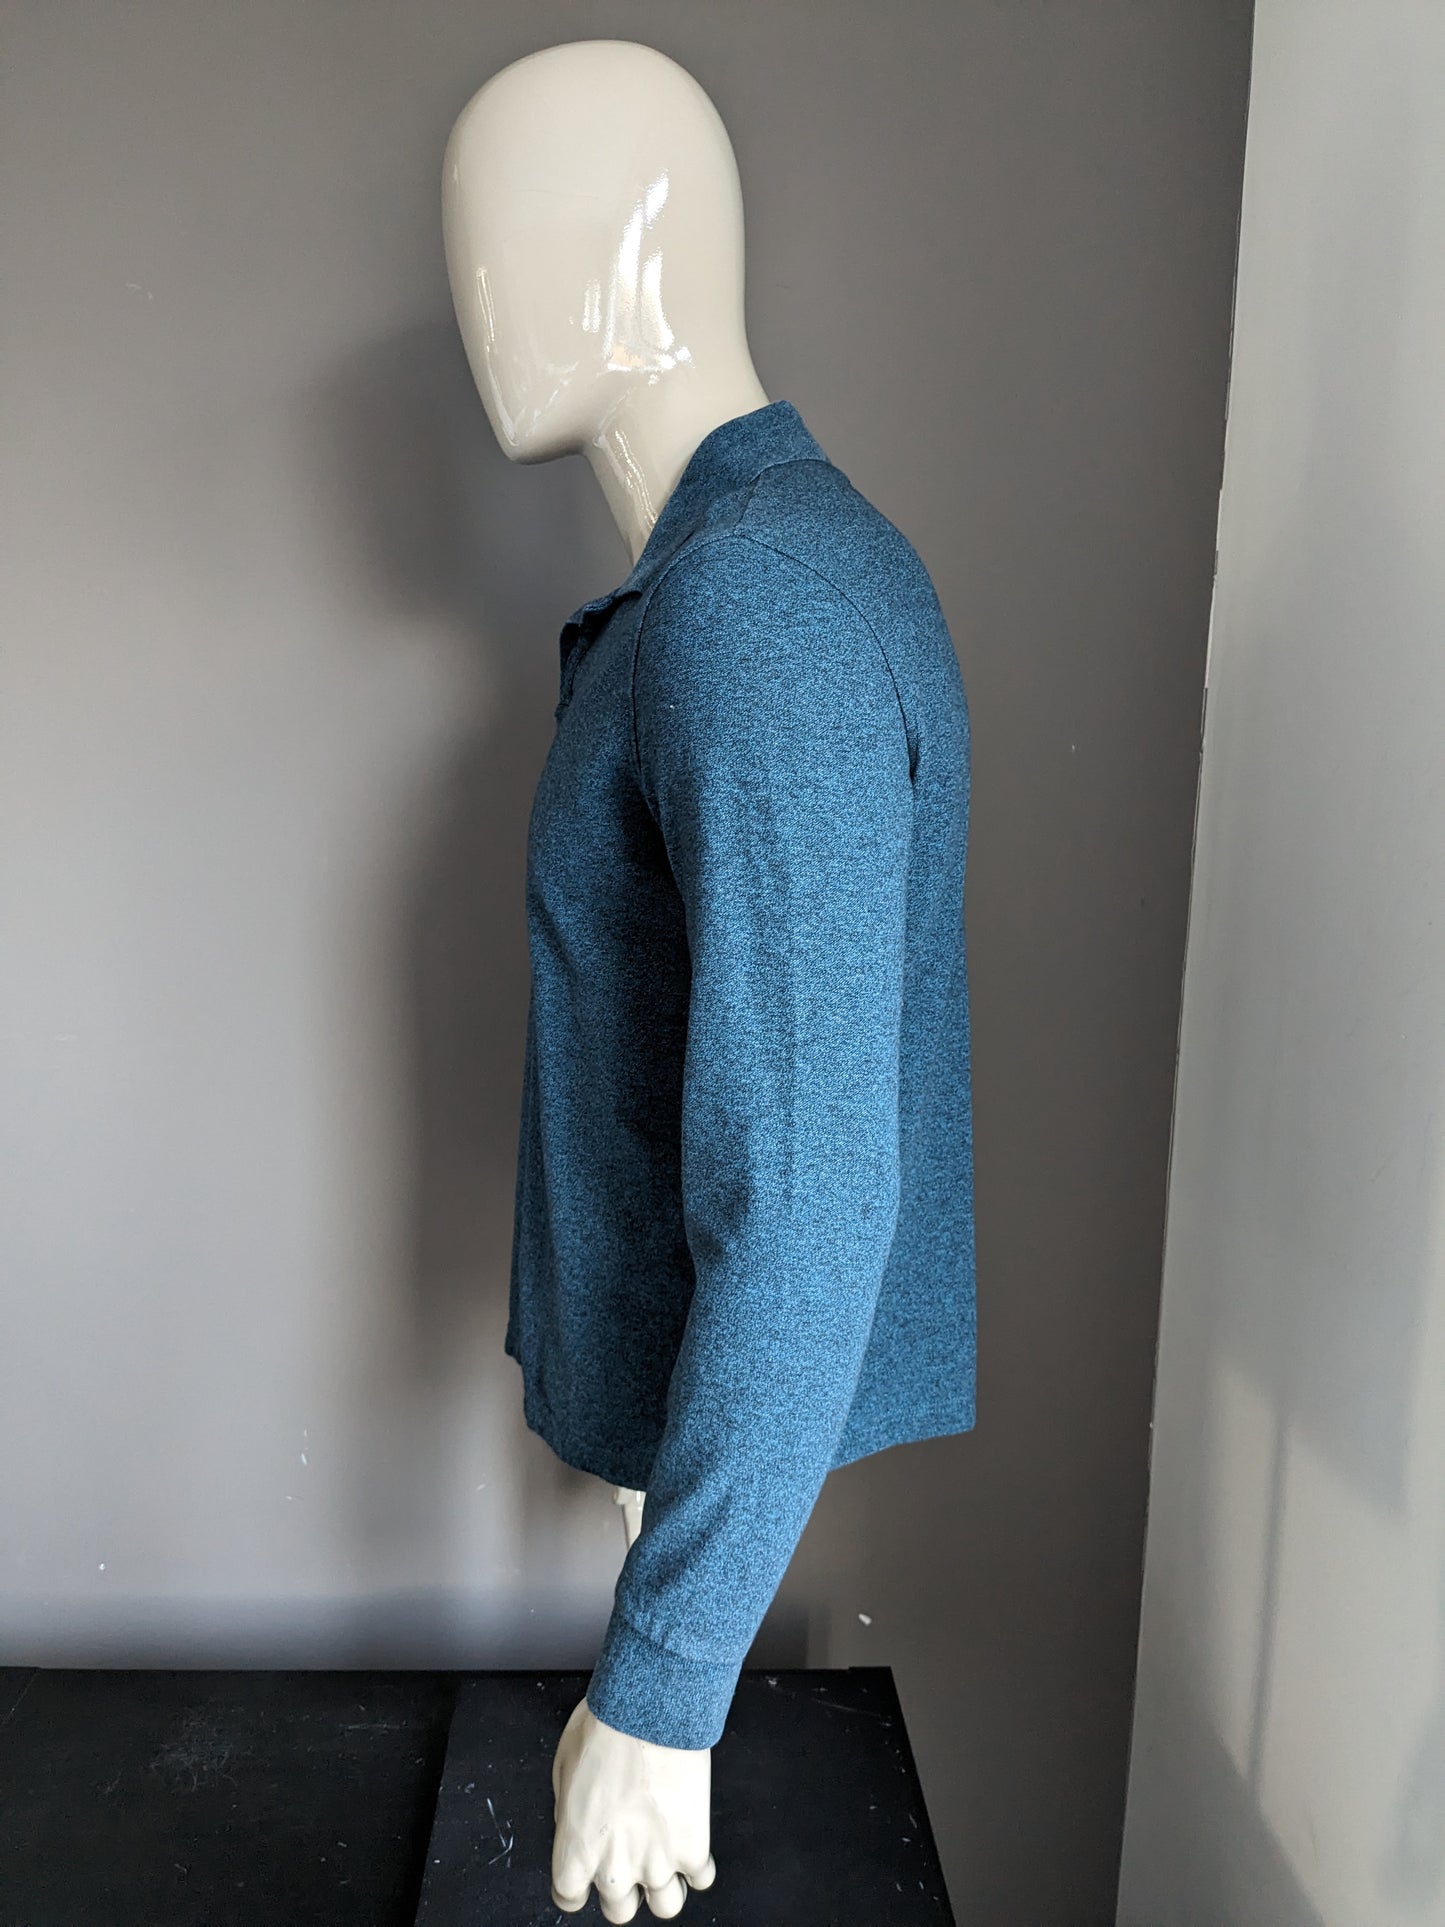 M&S Collection Polotrui. Green blue mixed. Size M.